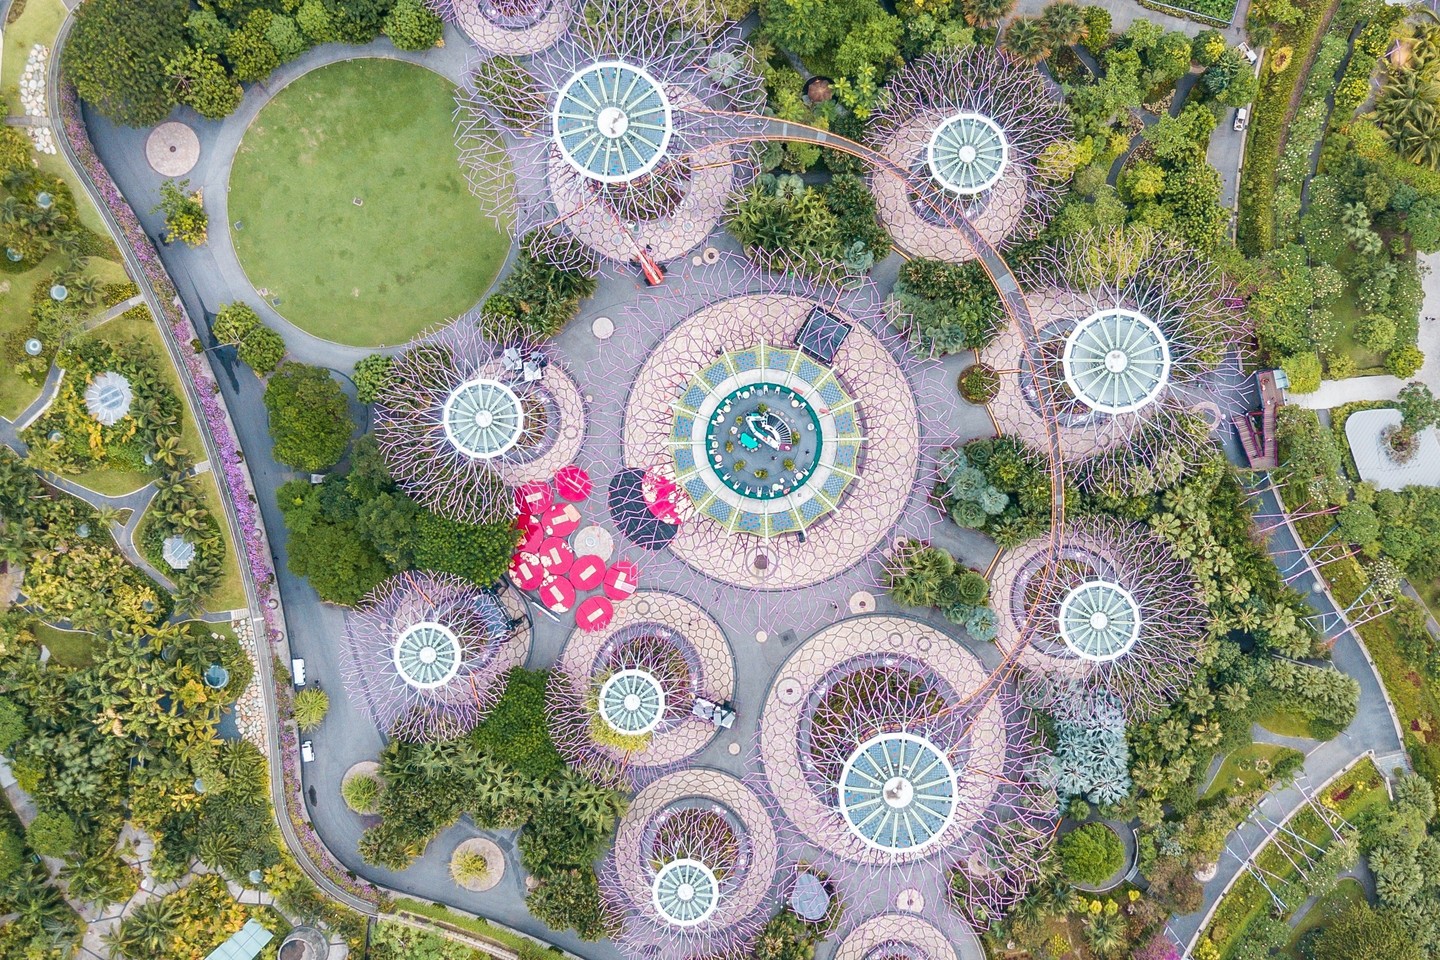 Solar-powered supertrees at Singapore's Gardens by the Bay. Image: Fahrul Azmi, via Unsplash